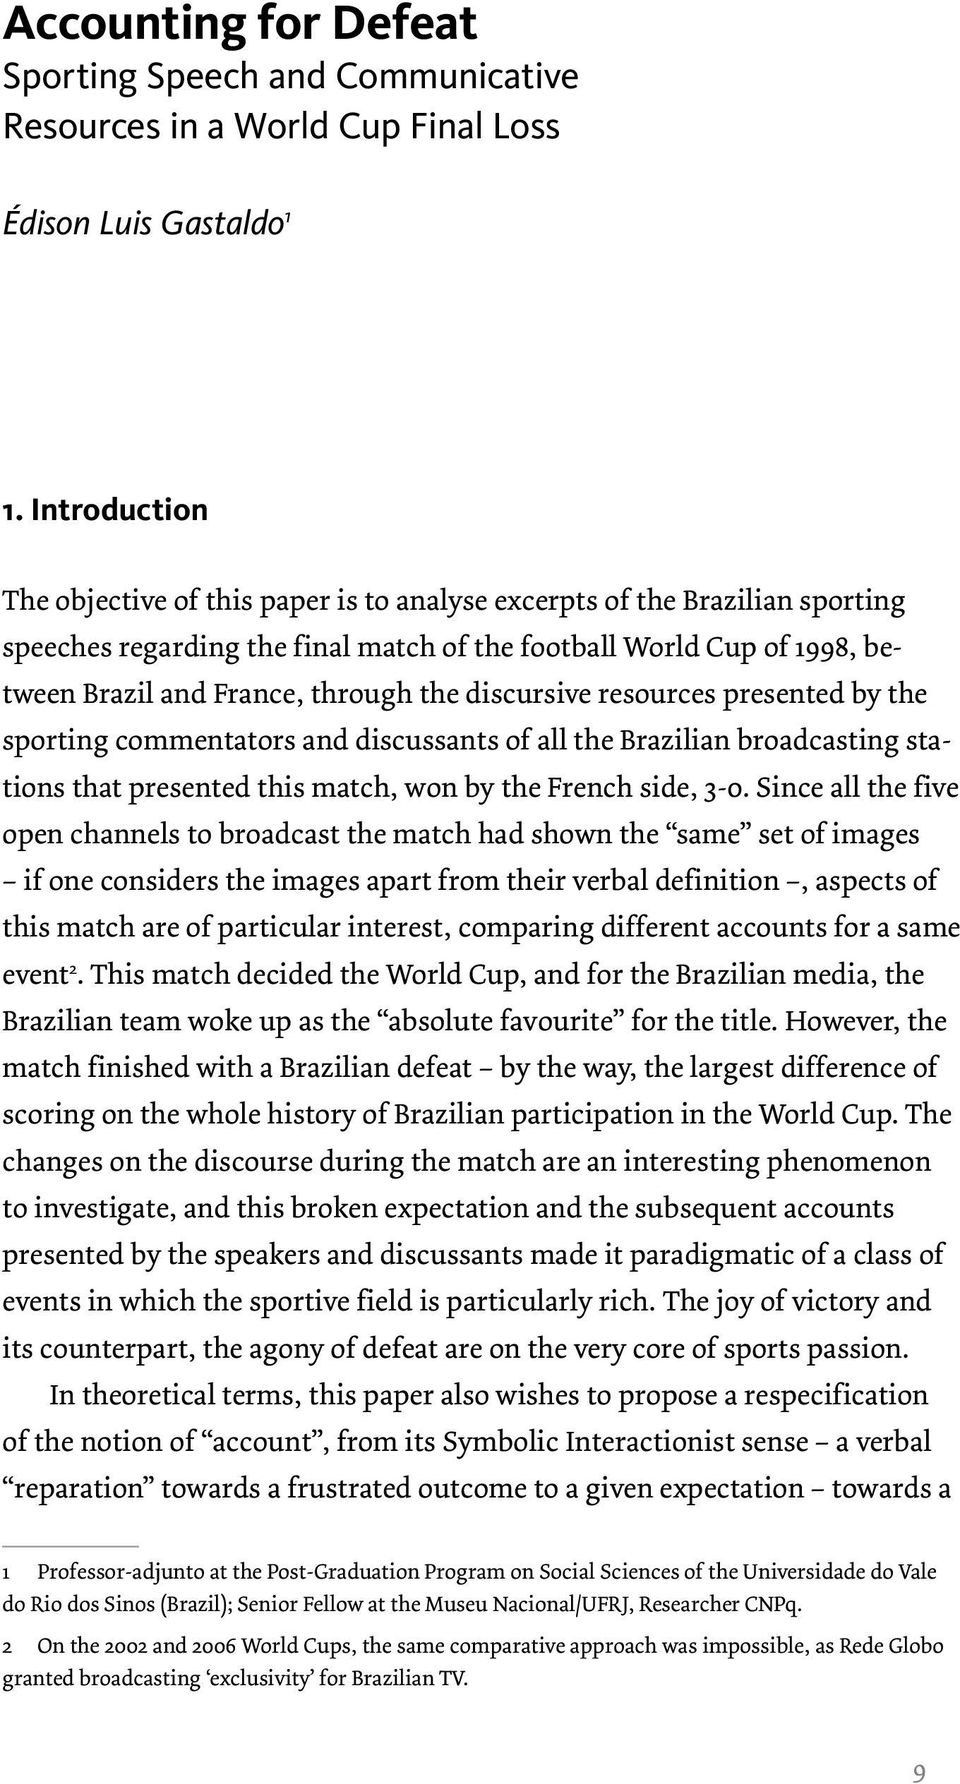 discursive resources presented by the sporting commentators and discussants of all the Brazilian broadcasting stations that presented this match, won by the French side, 3-0.